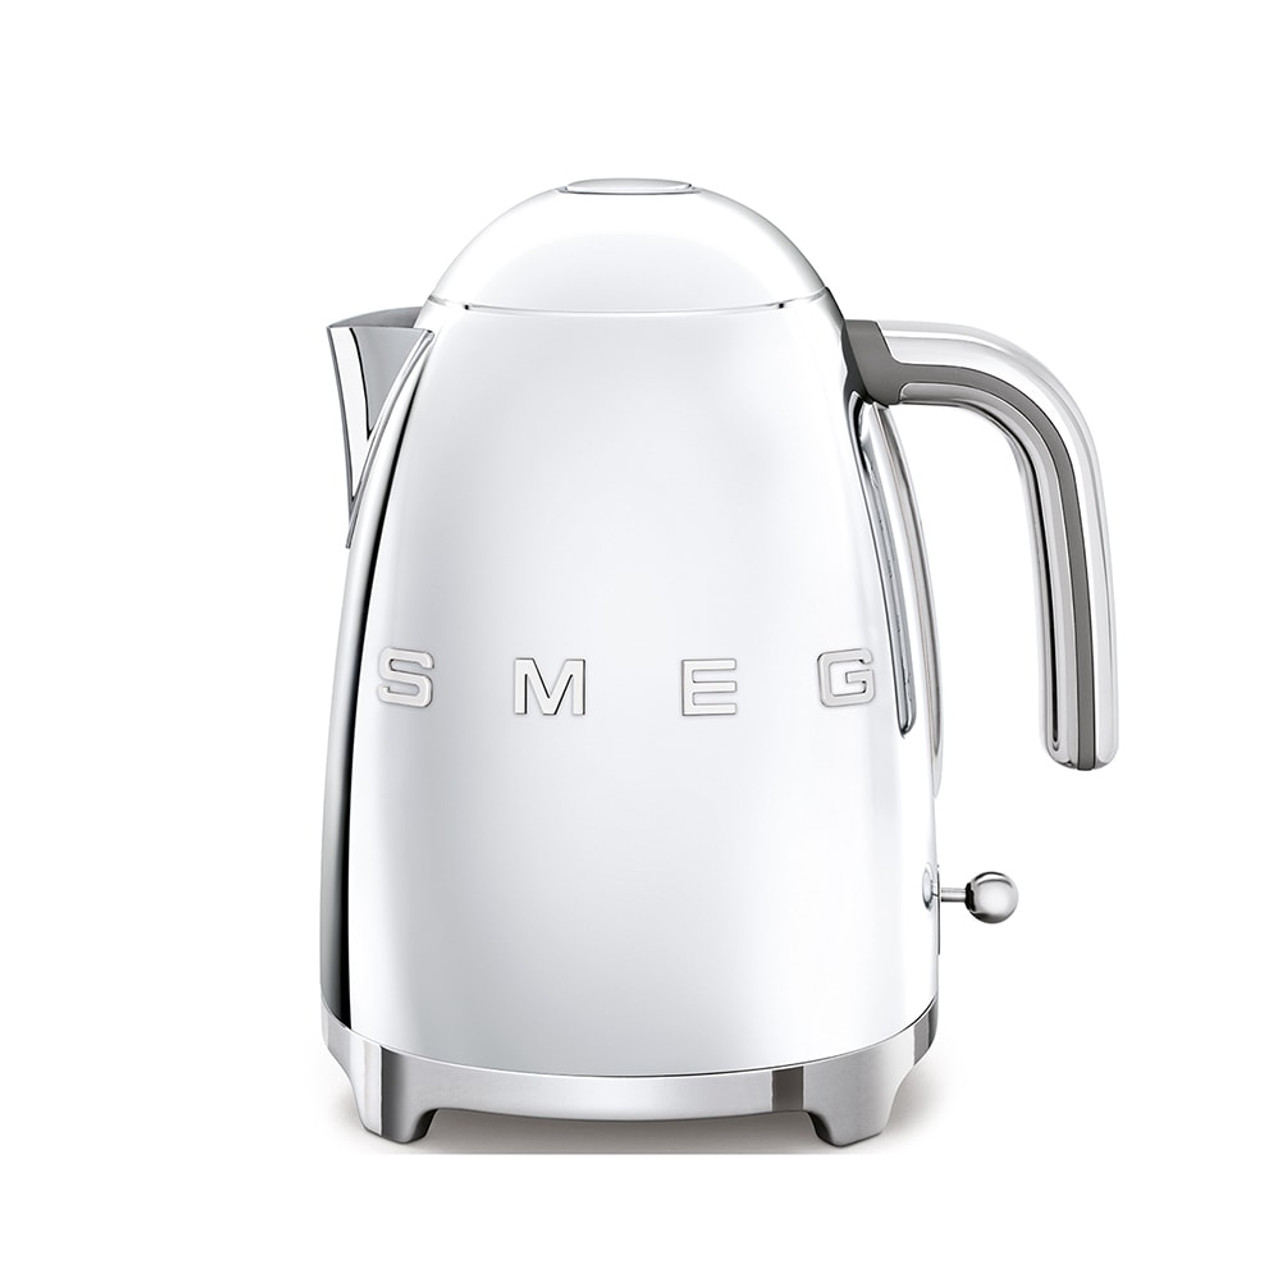 https://cdn11.bigcommerce.com/s-hccytny0od/images/stencil/1280x1280/products/2503/8617/smeg-electric-kettle-stainless__65197.1657201580.jpg?c=2?imbypass=on